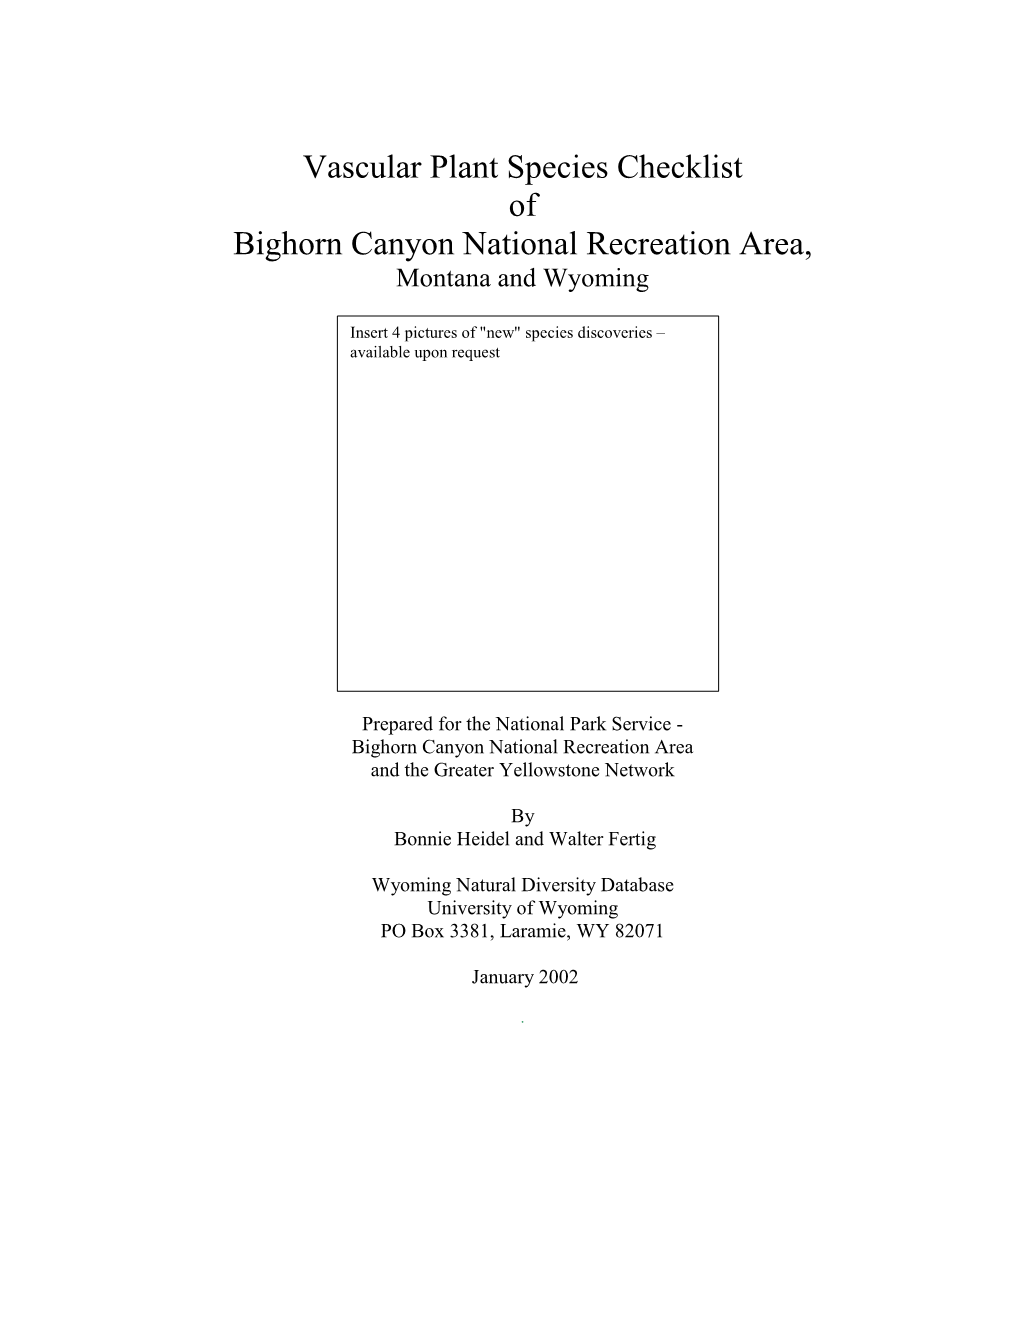 Vascular Plant Species Checklist of Bighorn Canyon National Recreation Area, Montana and Wyoming